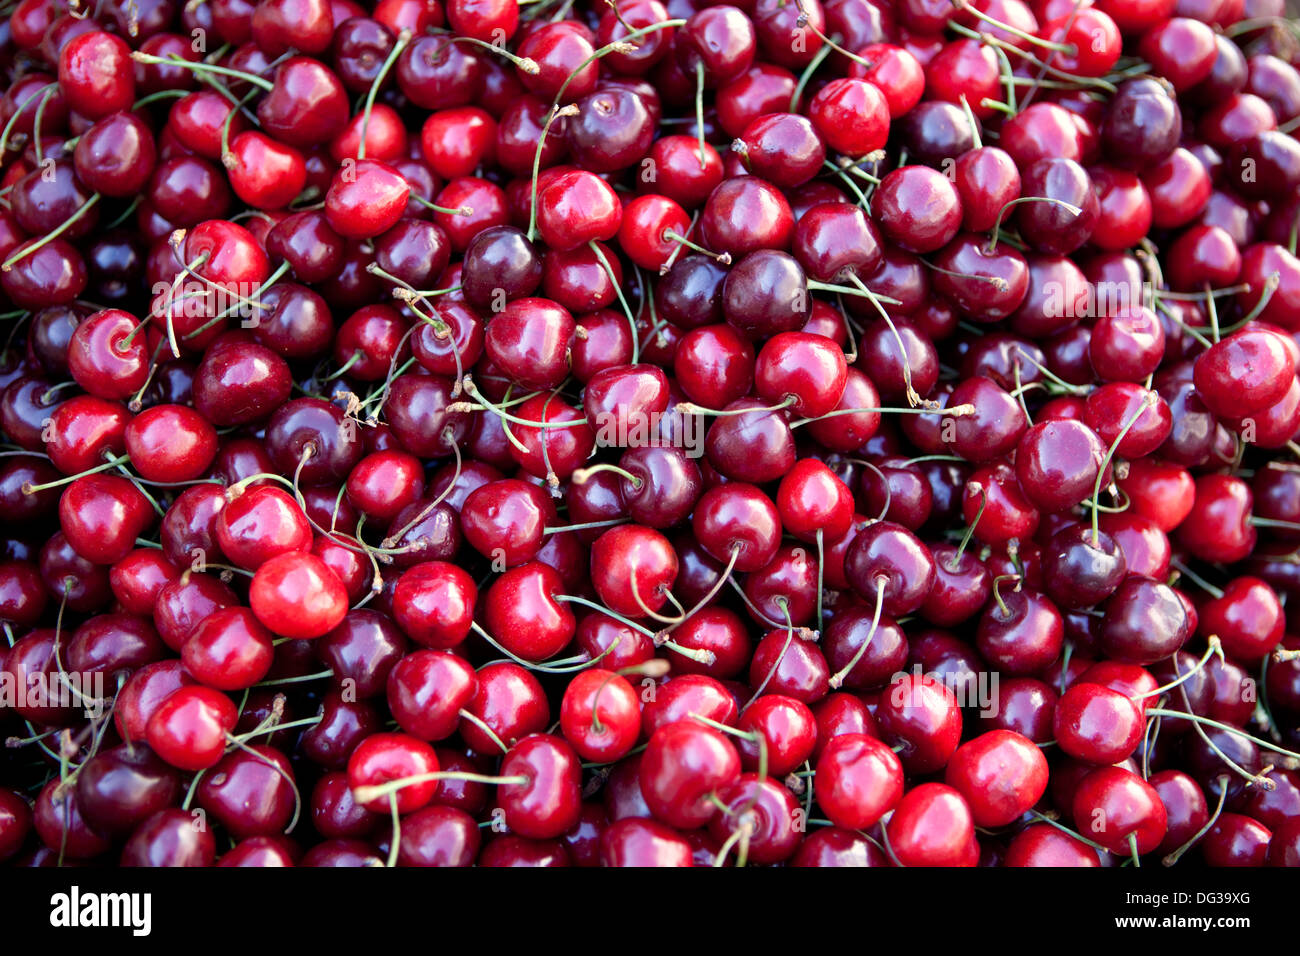 Cherries from Italy at a market stall, Hanover, Lower Saxony, Germany, Europe, Stock Photo